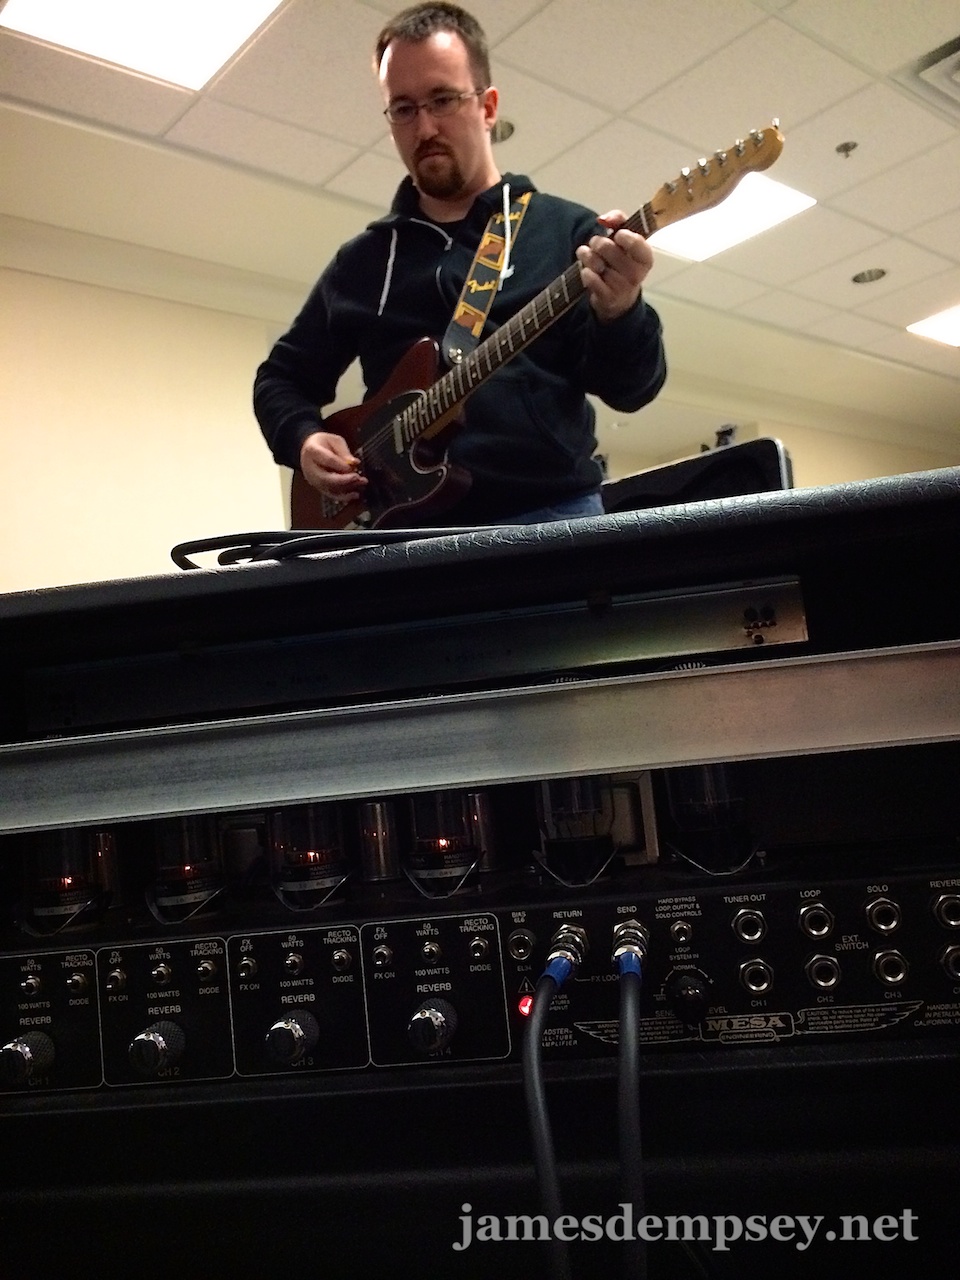 Brandon Alexander playing electric guitar in front of a big amplifier